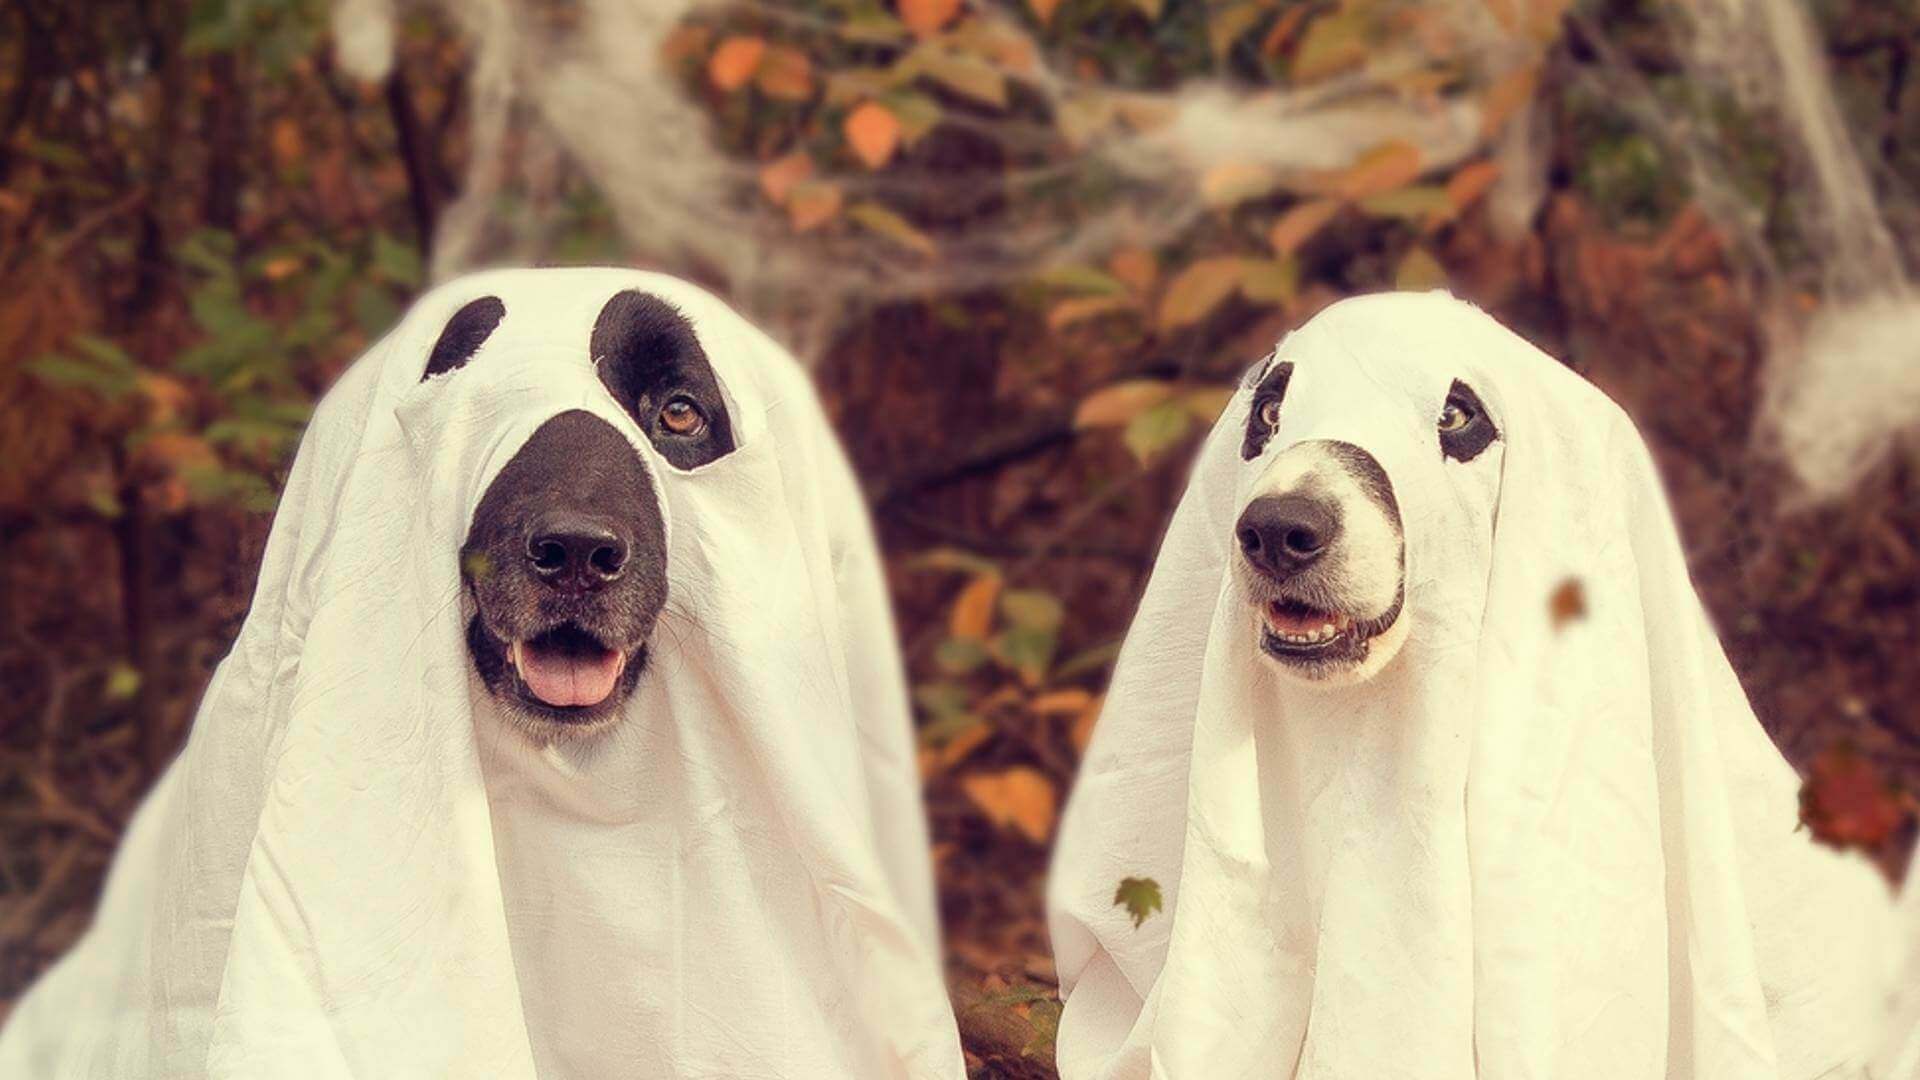 Dogs dressed up for Halloween